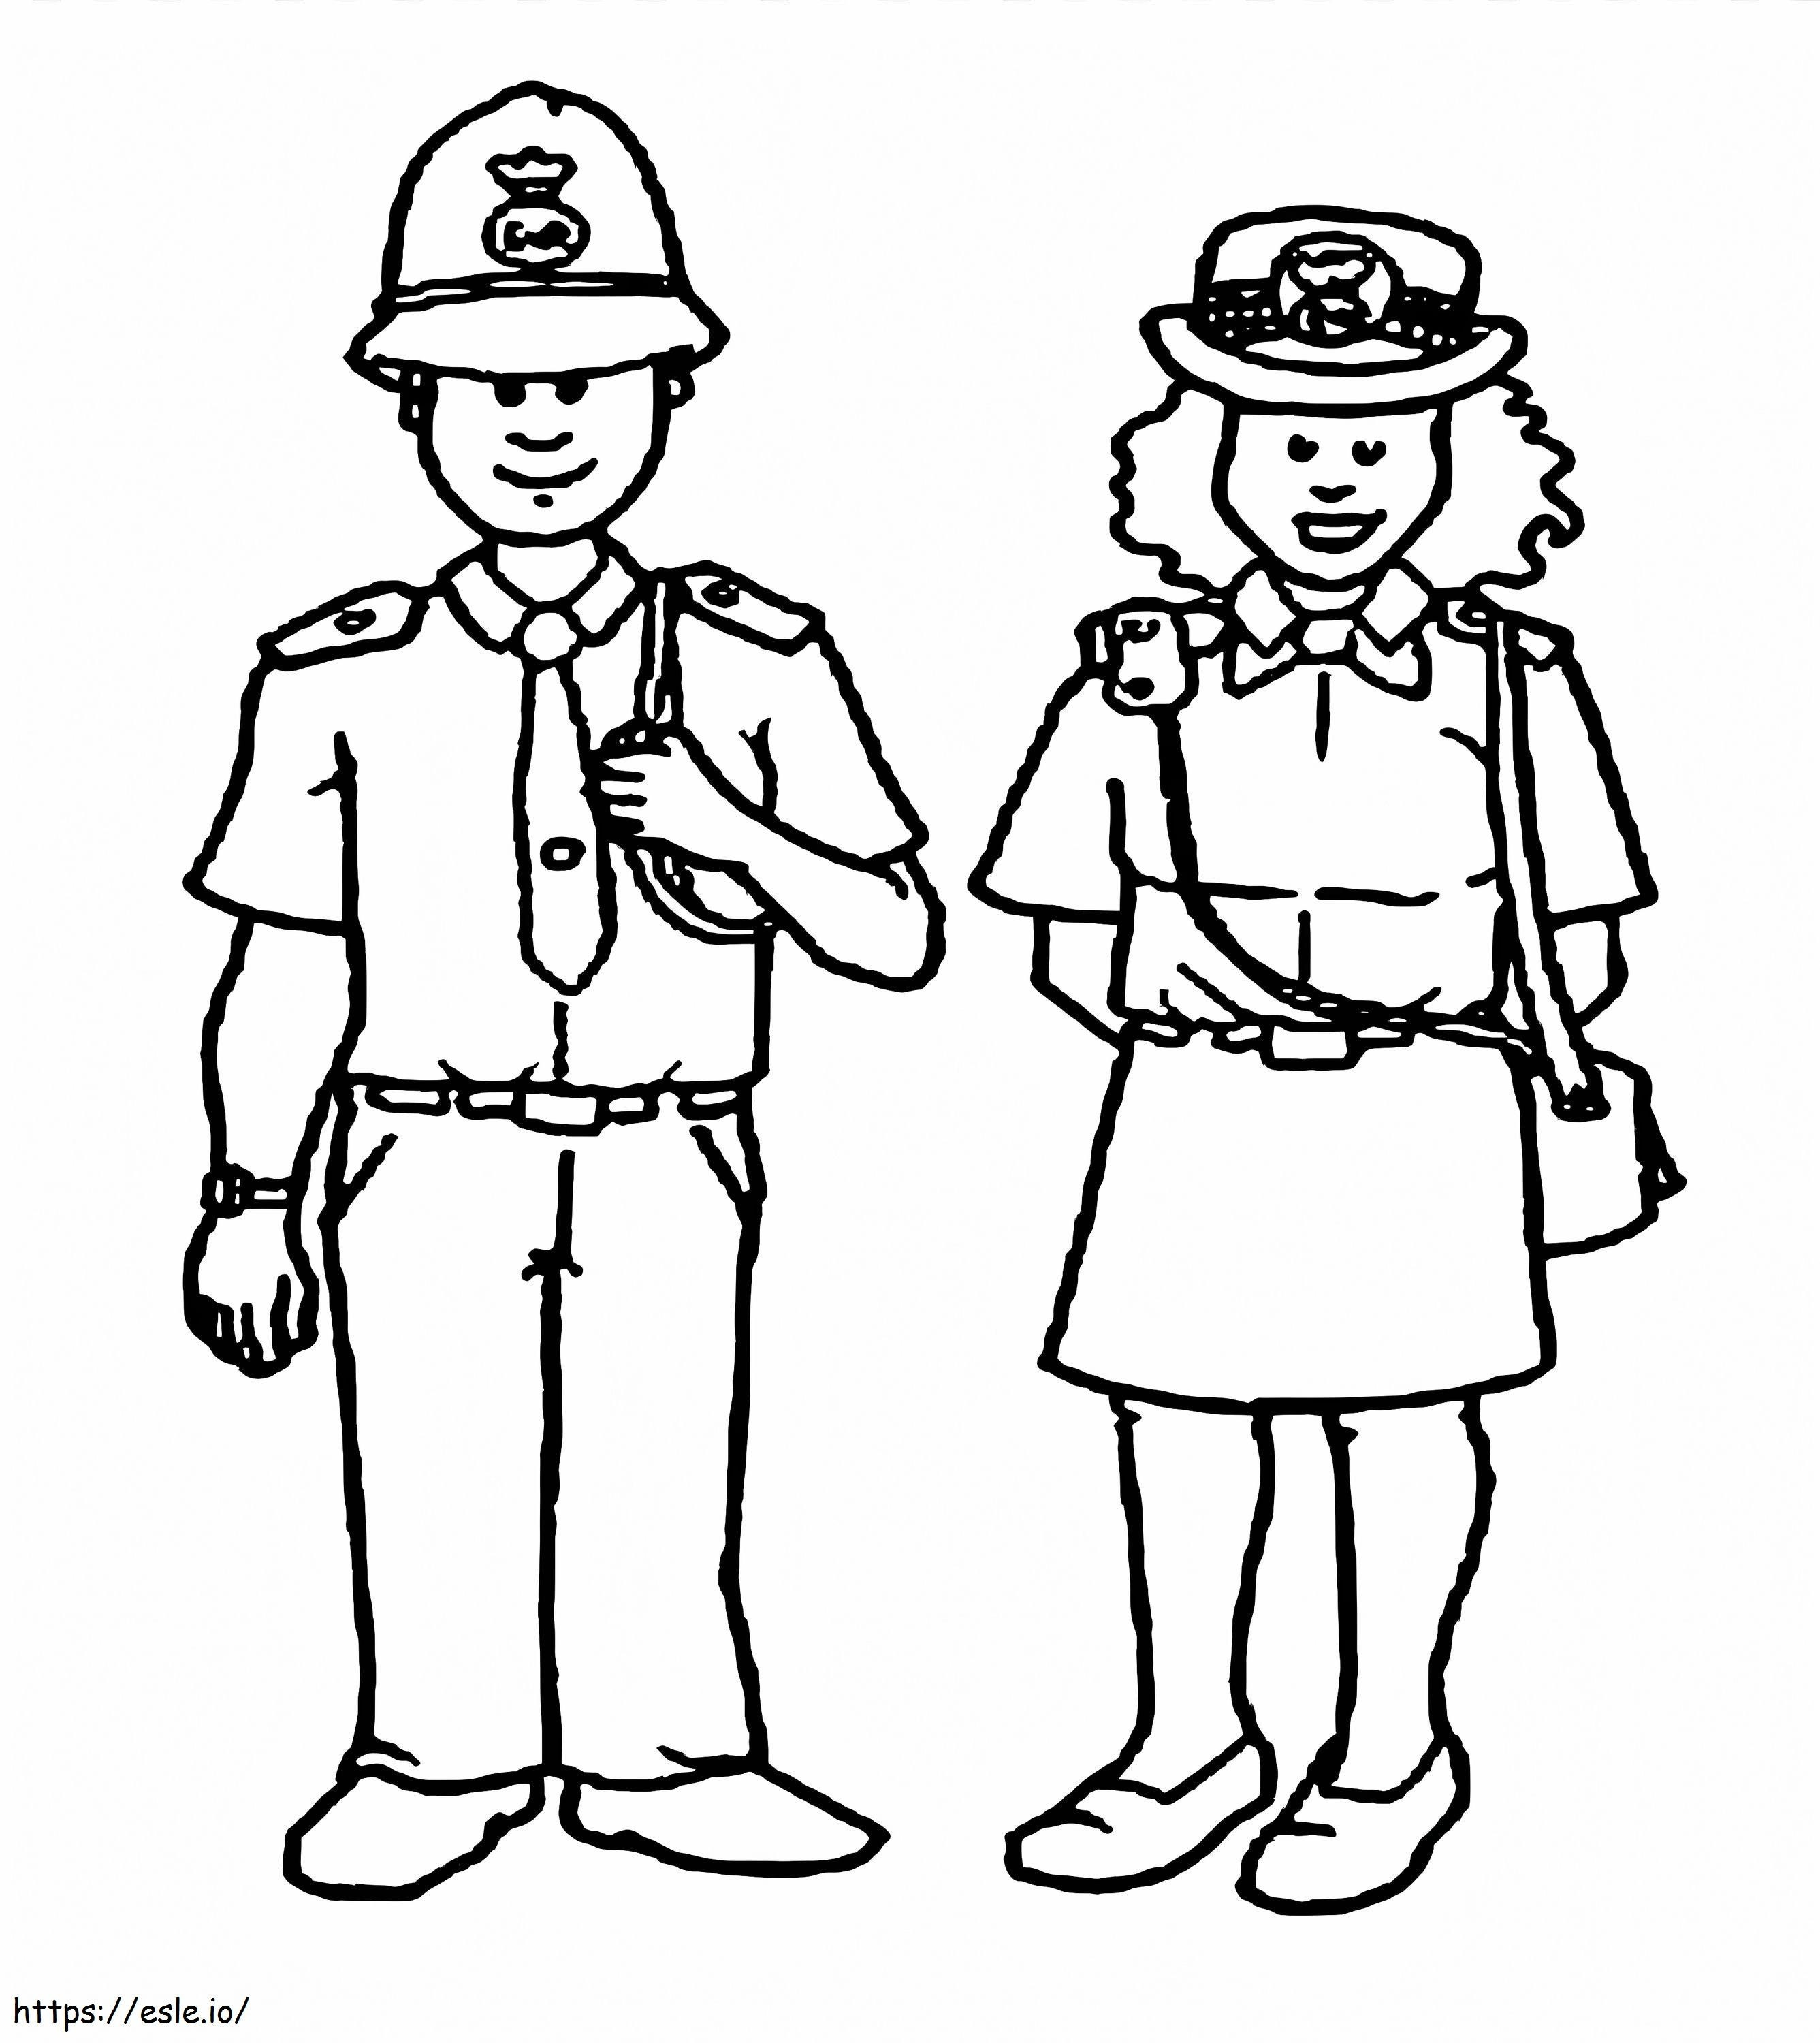 Police And Woman Drawing coloring page